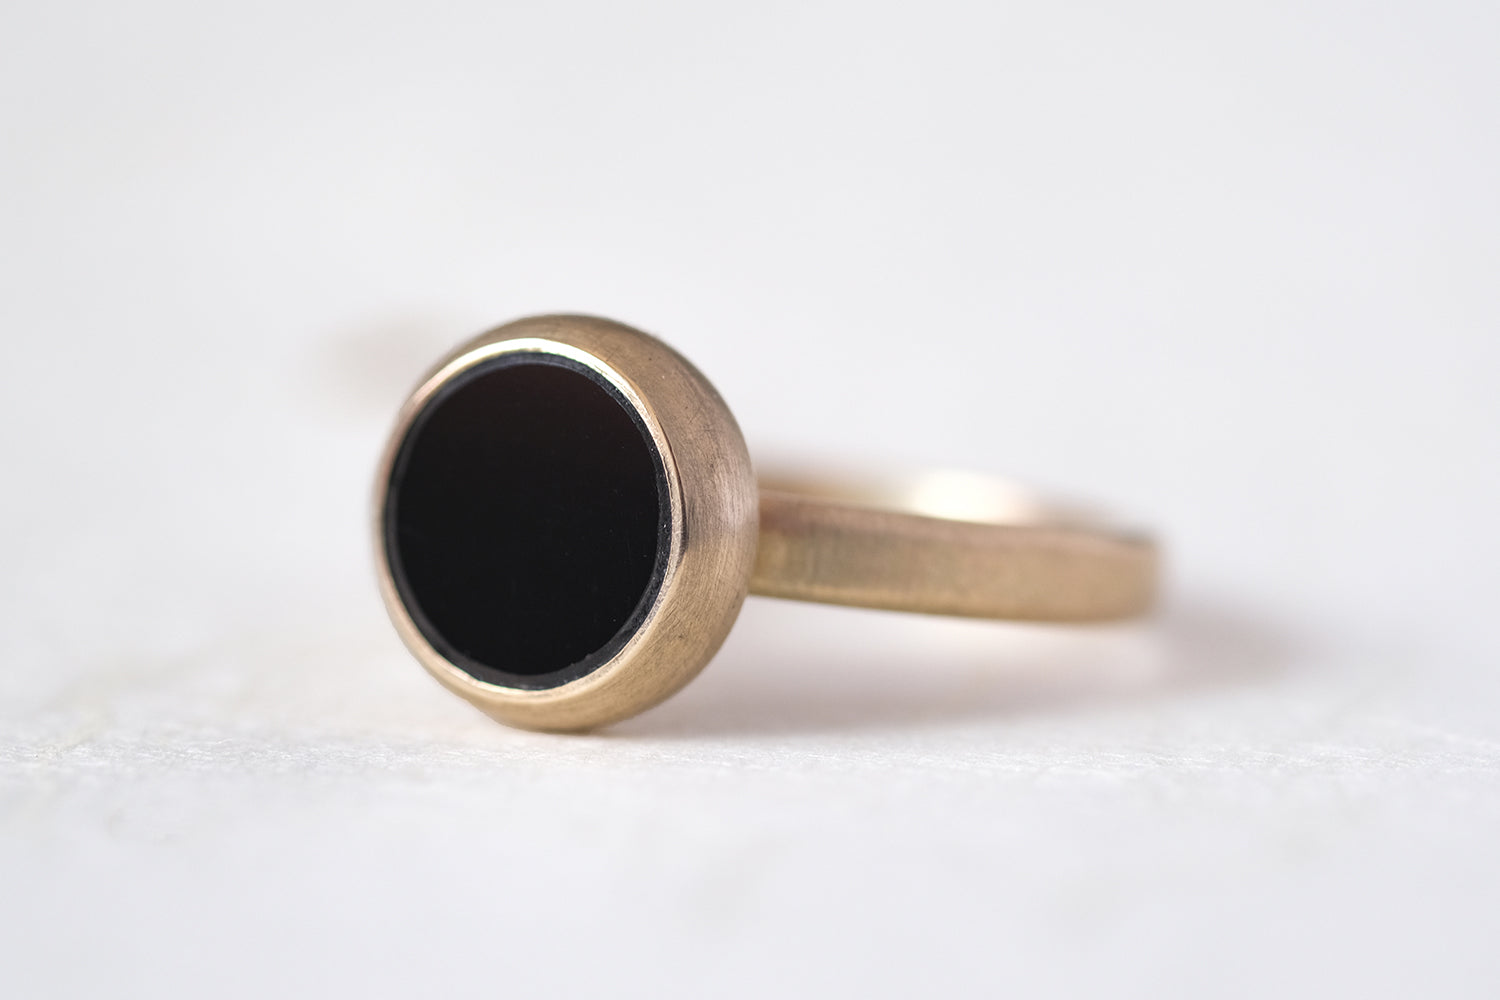 Gold Ring Set With An Onyx